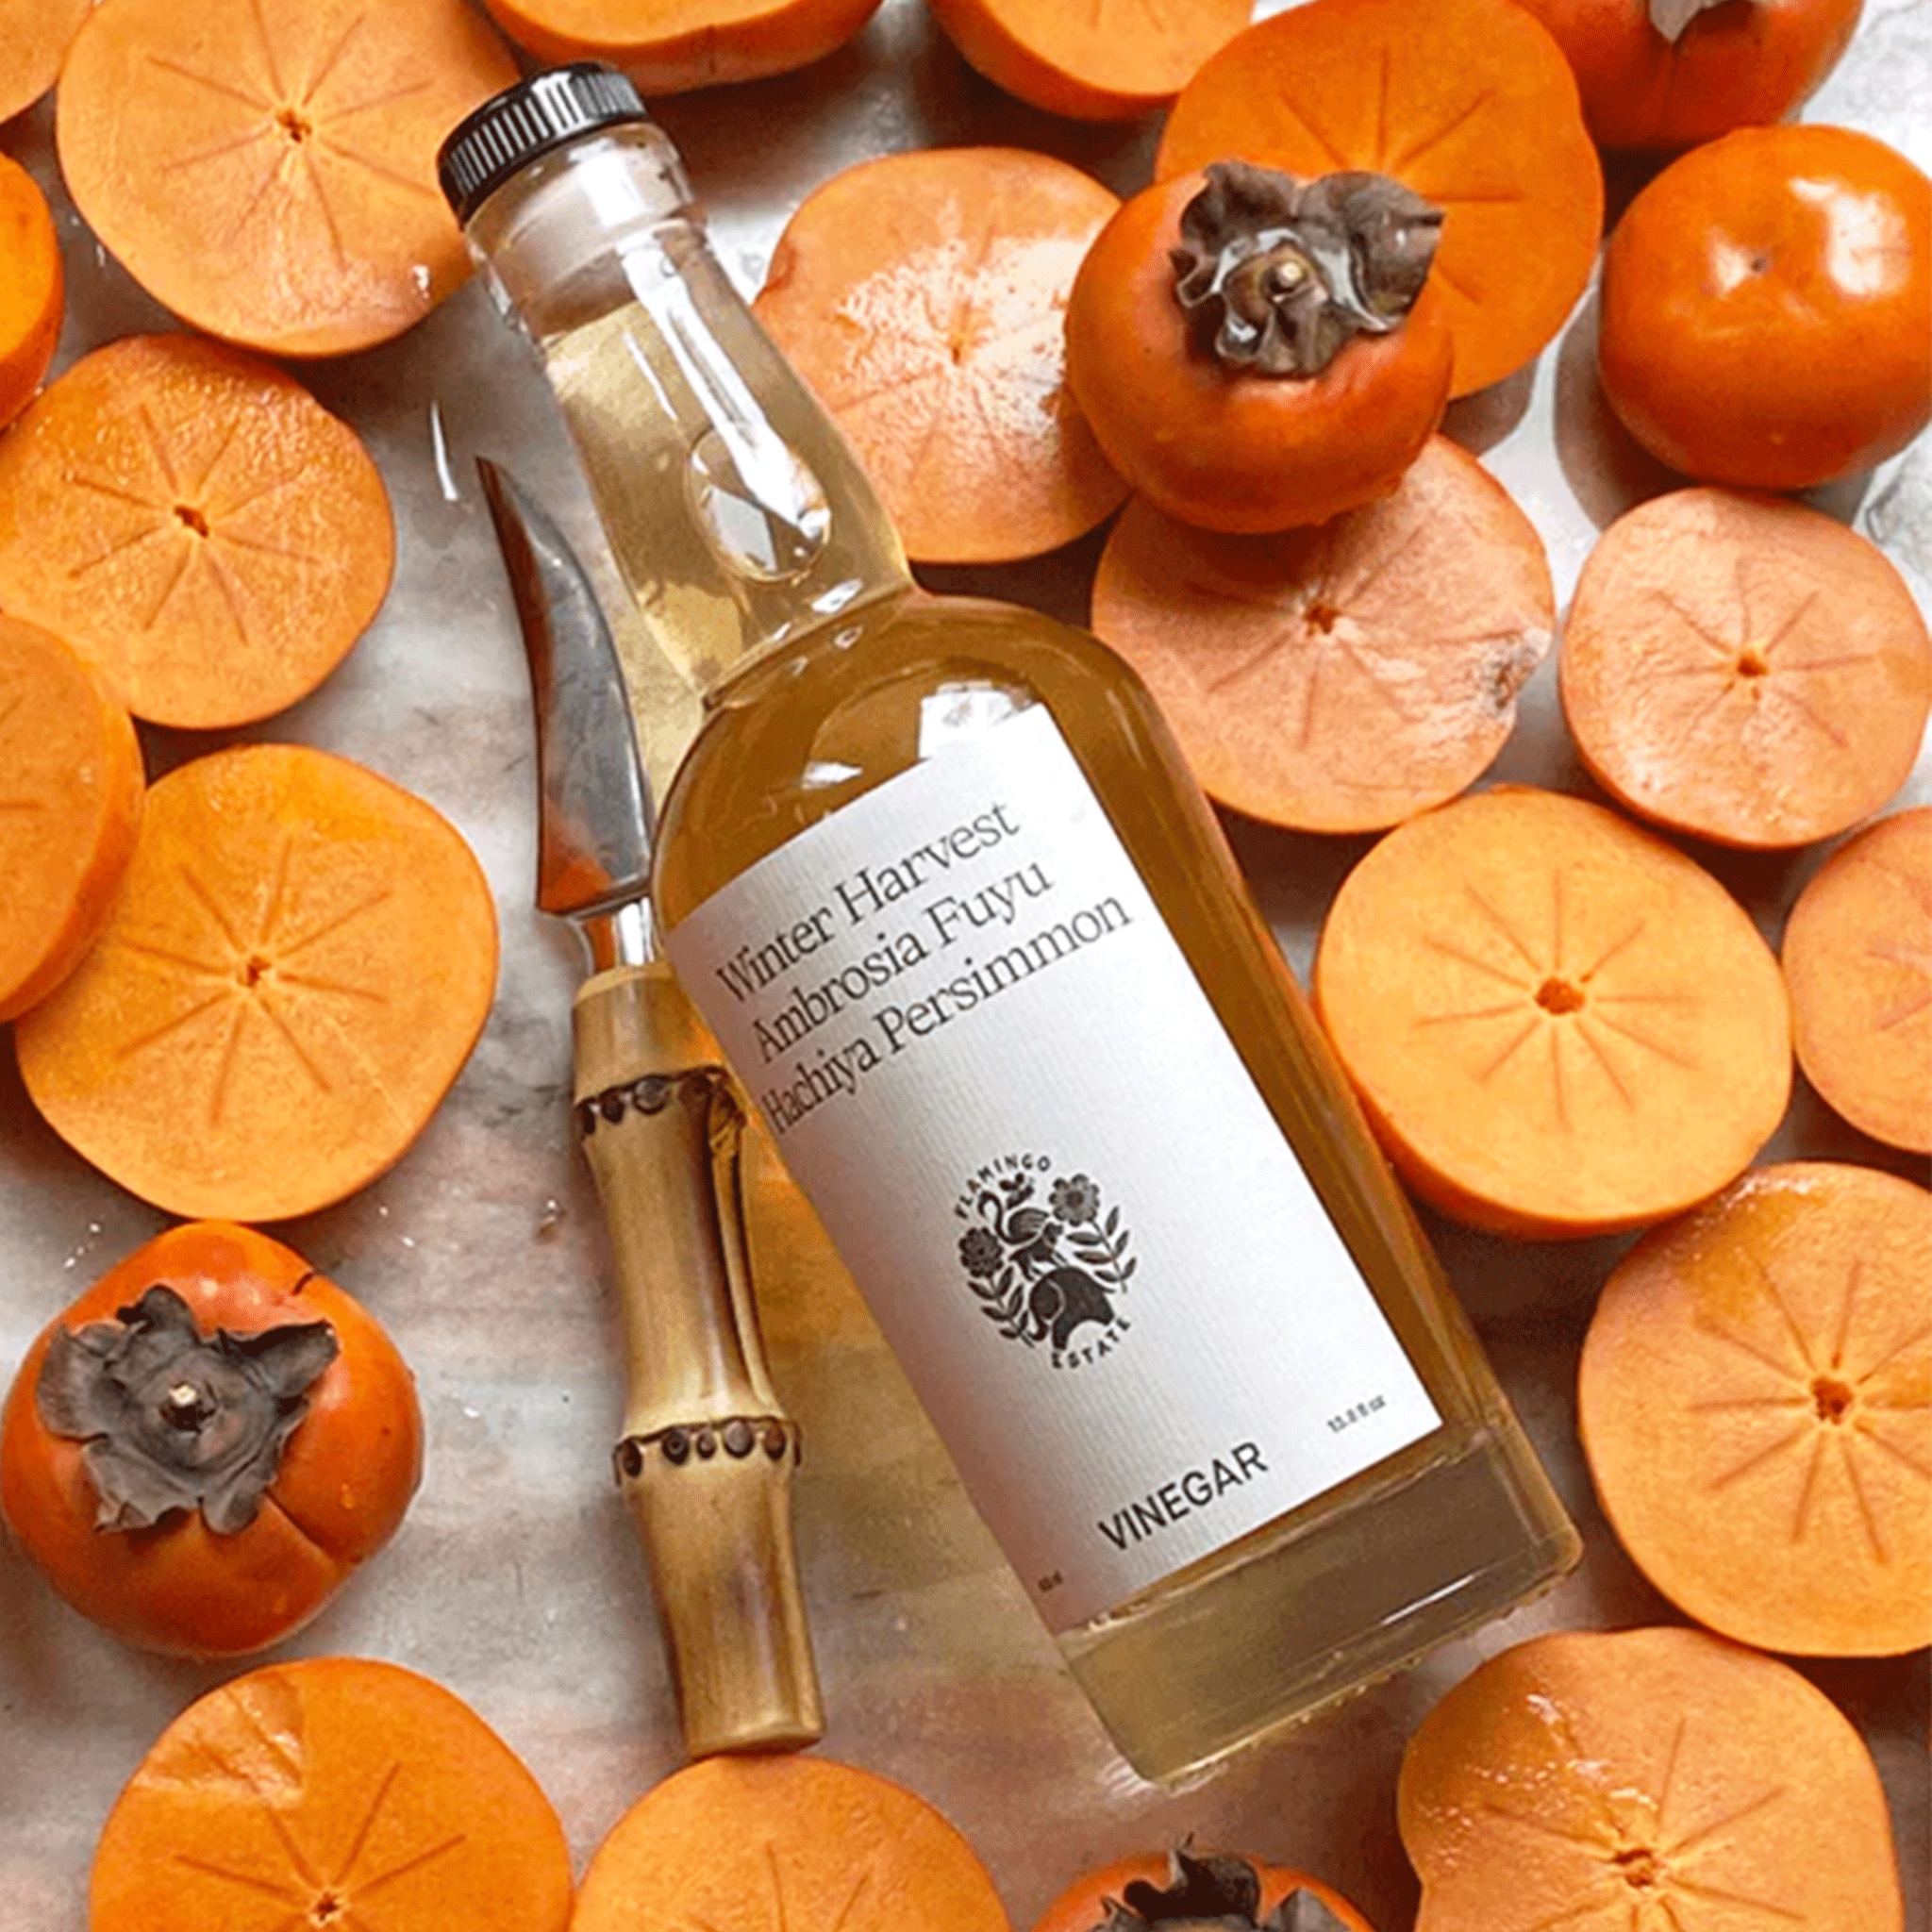 A clear bottle of persimmon vinegar with a white label on the front sitting on sliced persimmons. 